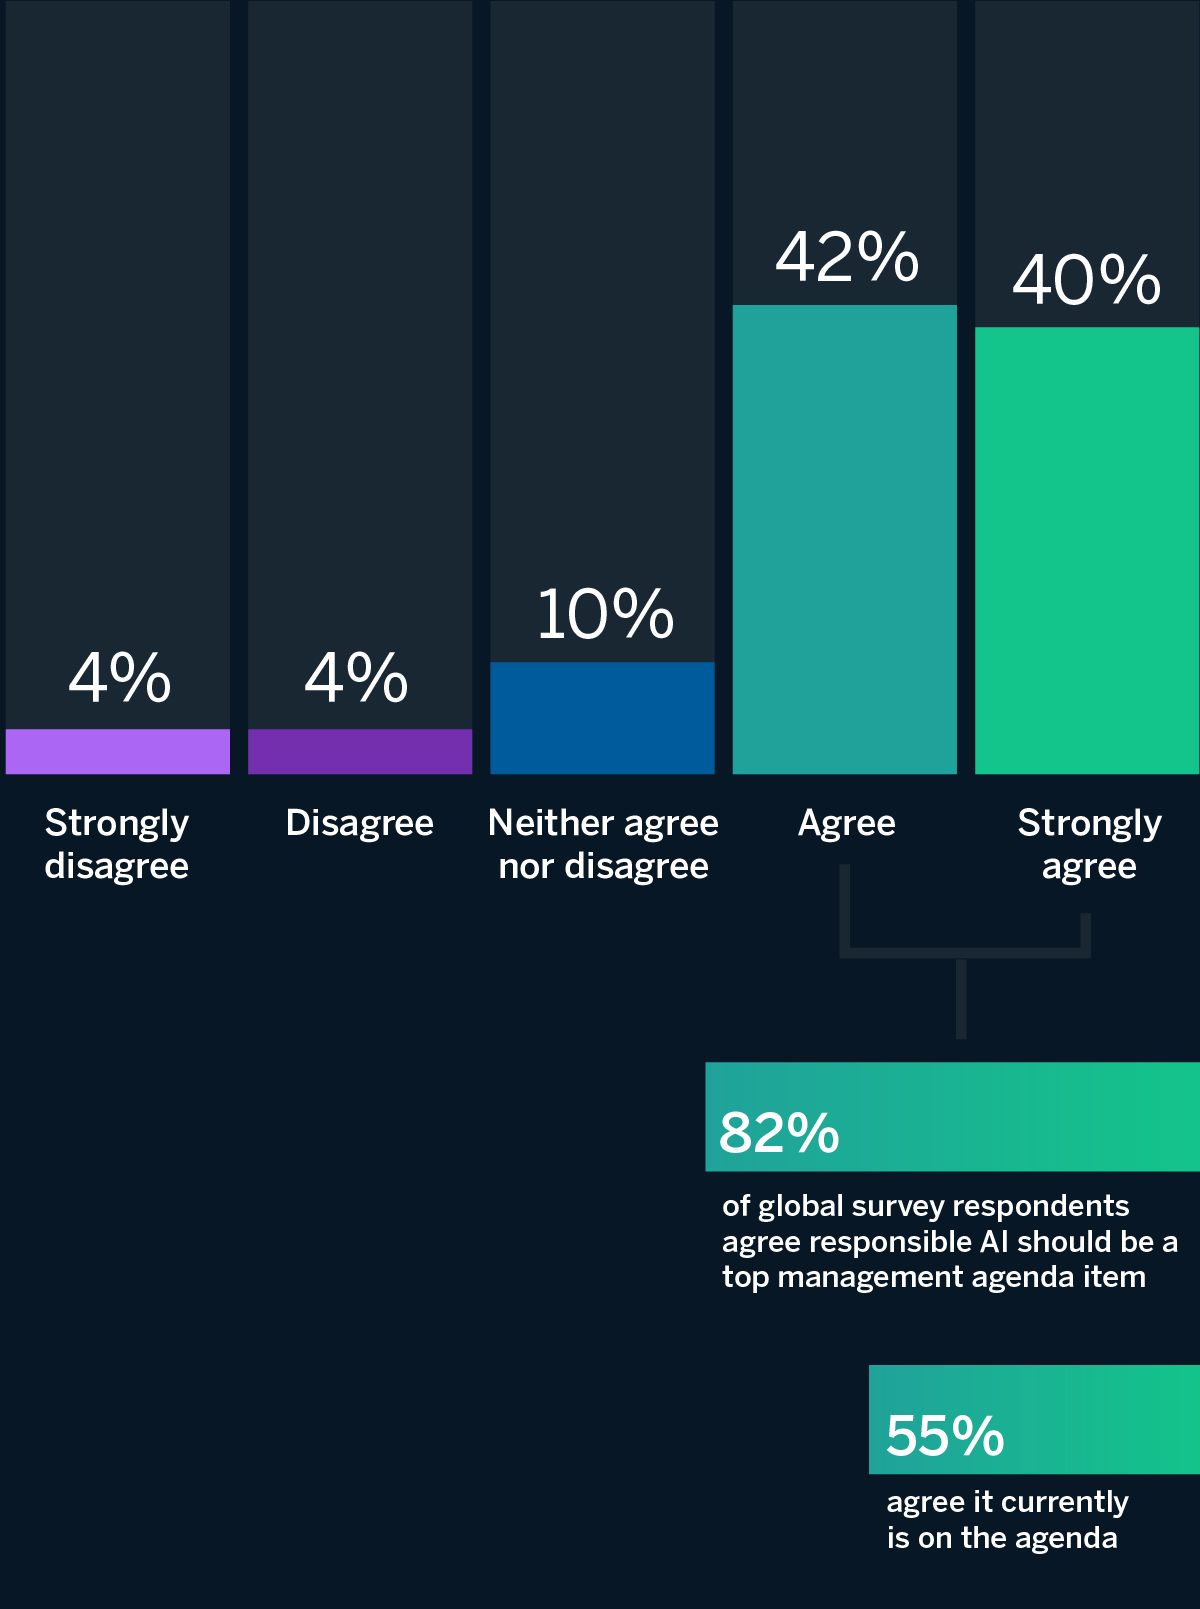 While 82% of global survey respondents agree responsible AI should be a top management agenda item, only 55% agree it currently is.